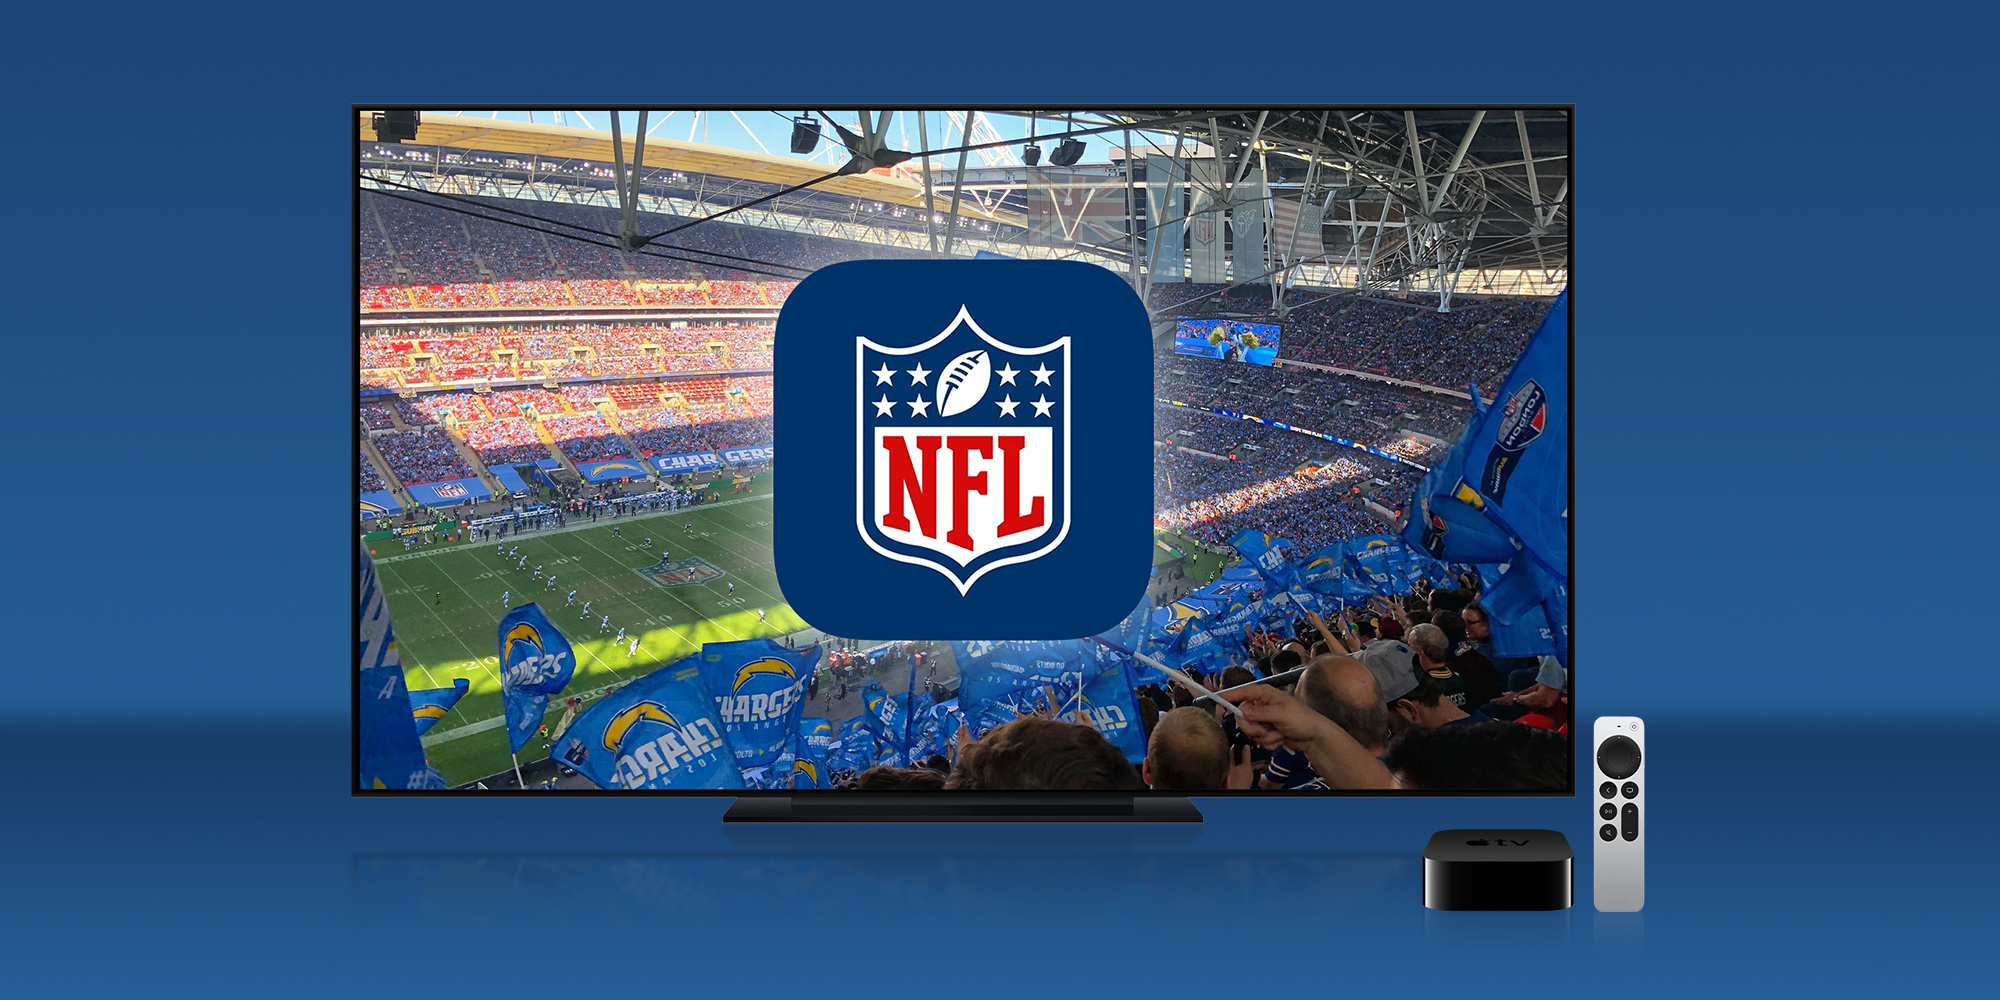 NFL Sunday Ticket could be coming to Apple TV+ - 9to5Mac